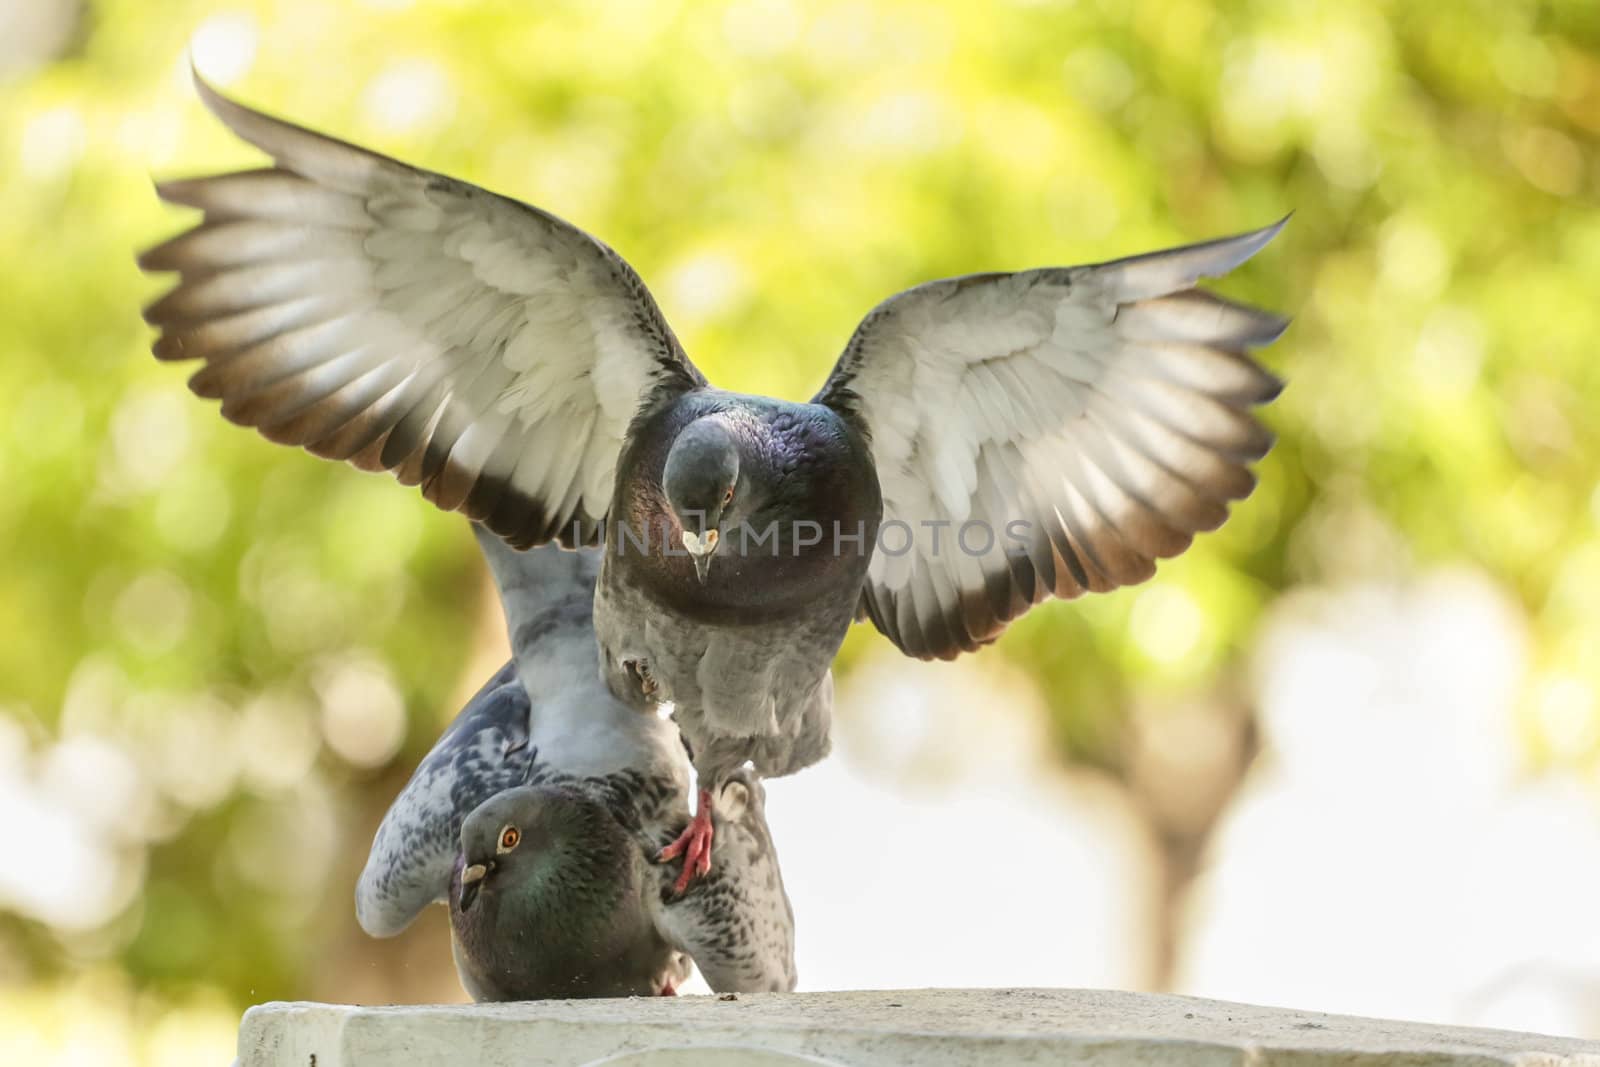 A male pigeon landing on the female initiating a mating ritual